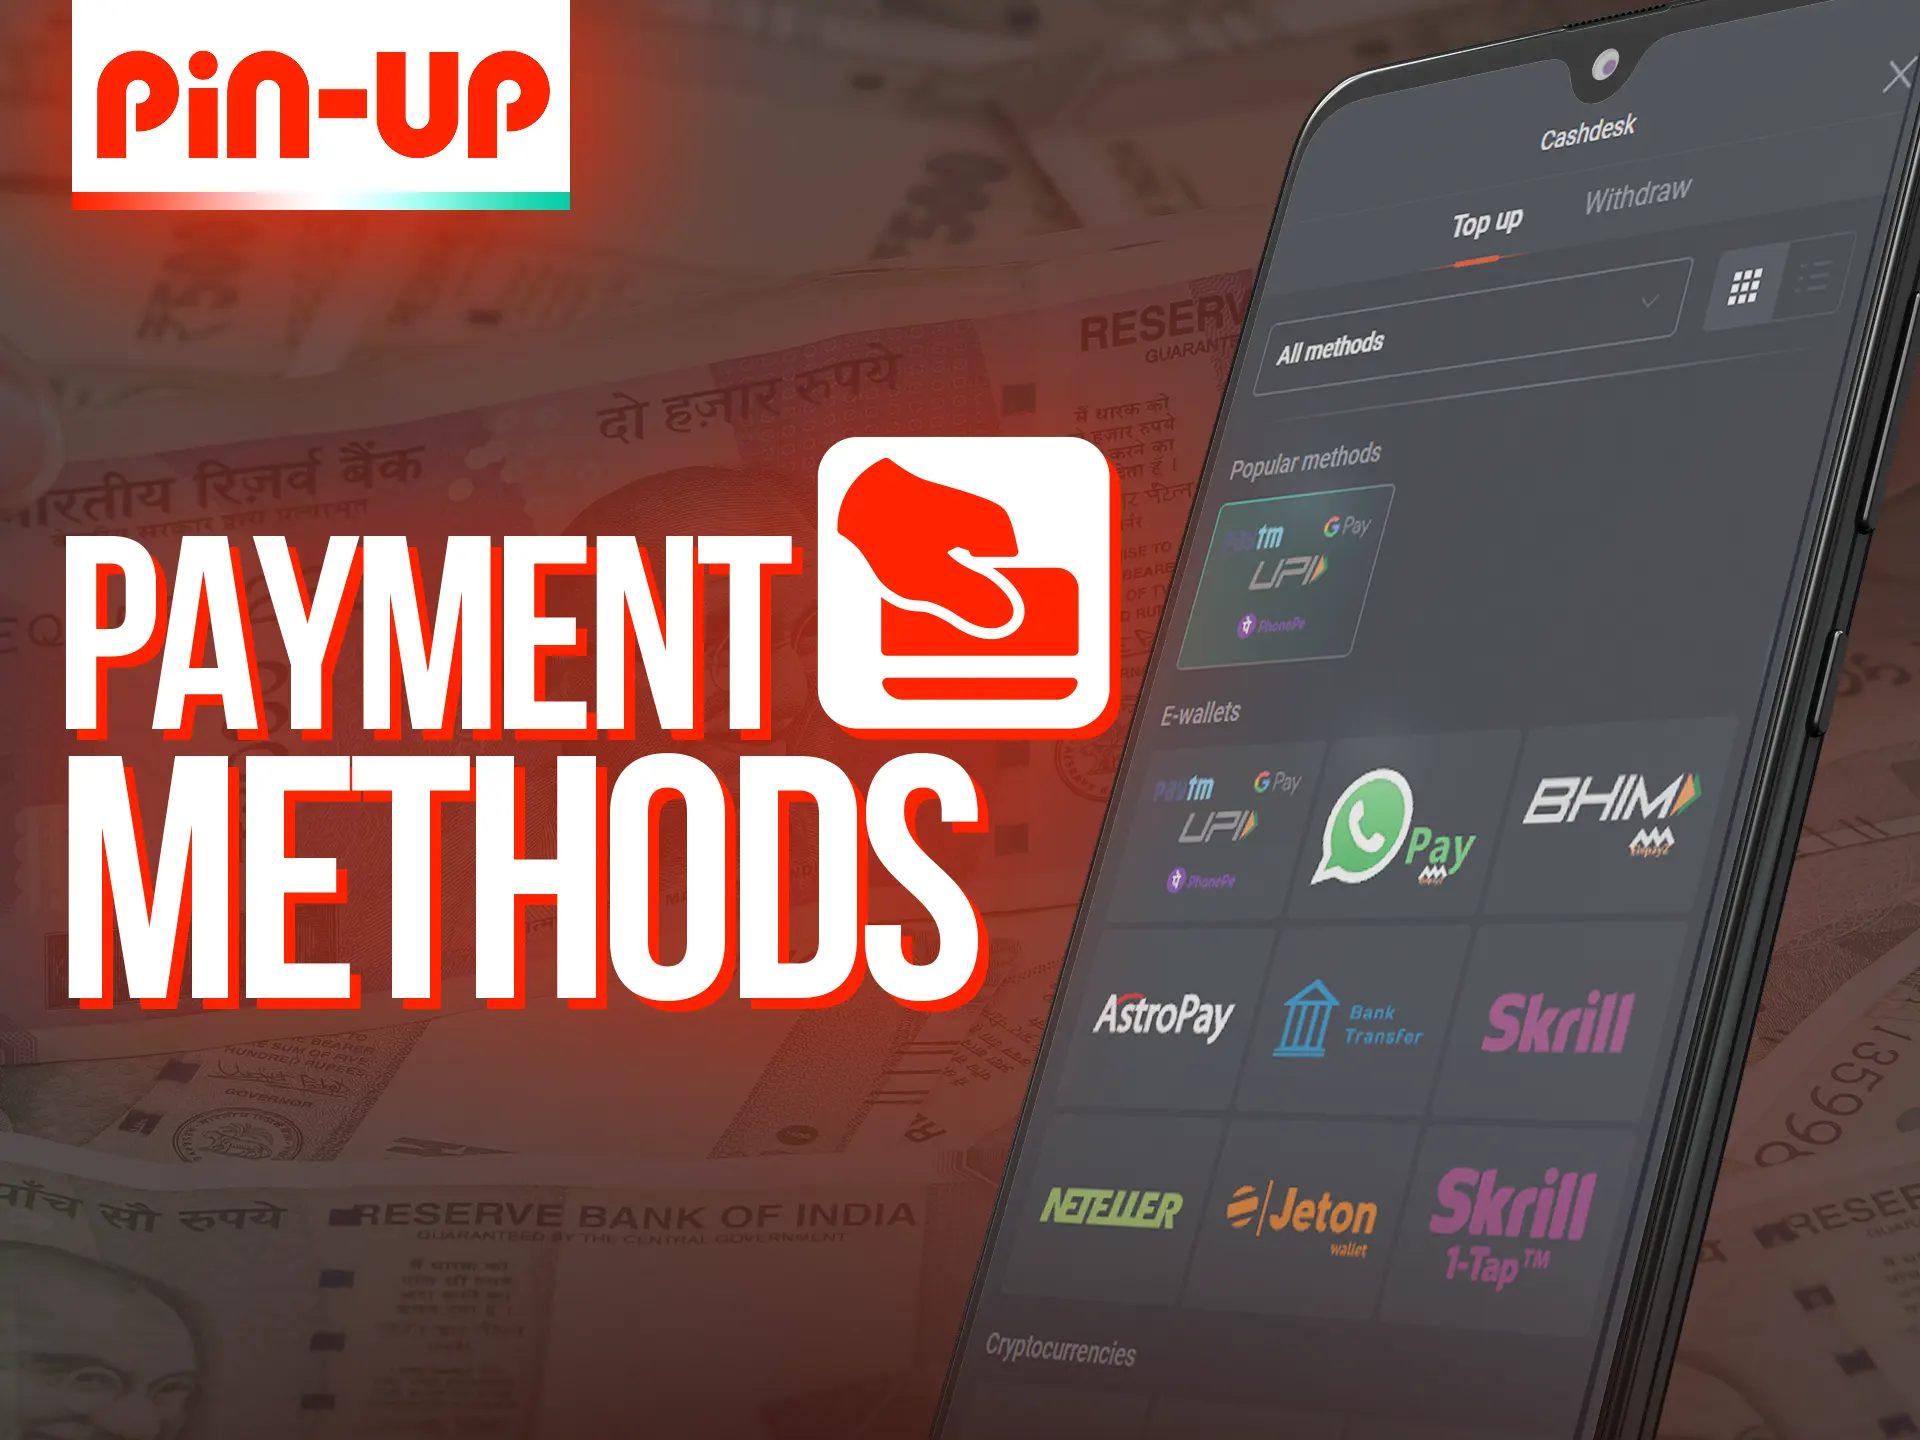 Familiarize yourself with the payment methods on Pin-Up.